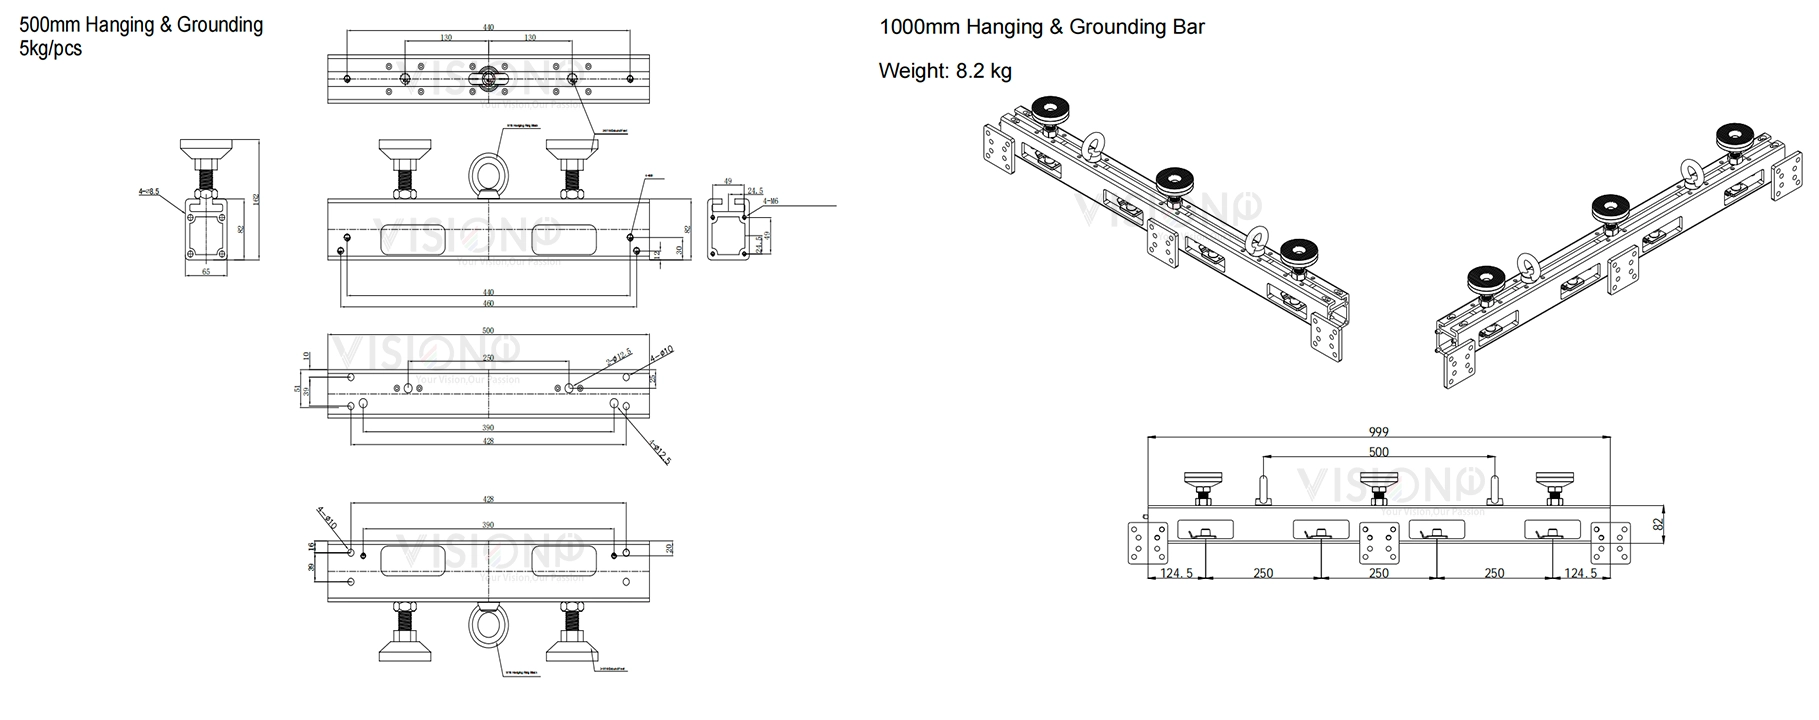 HANGING AND GROUND BAR DRAWING